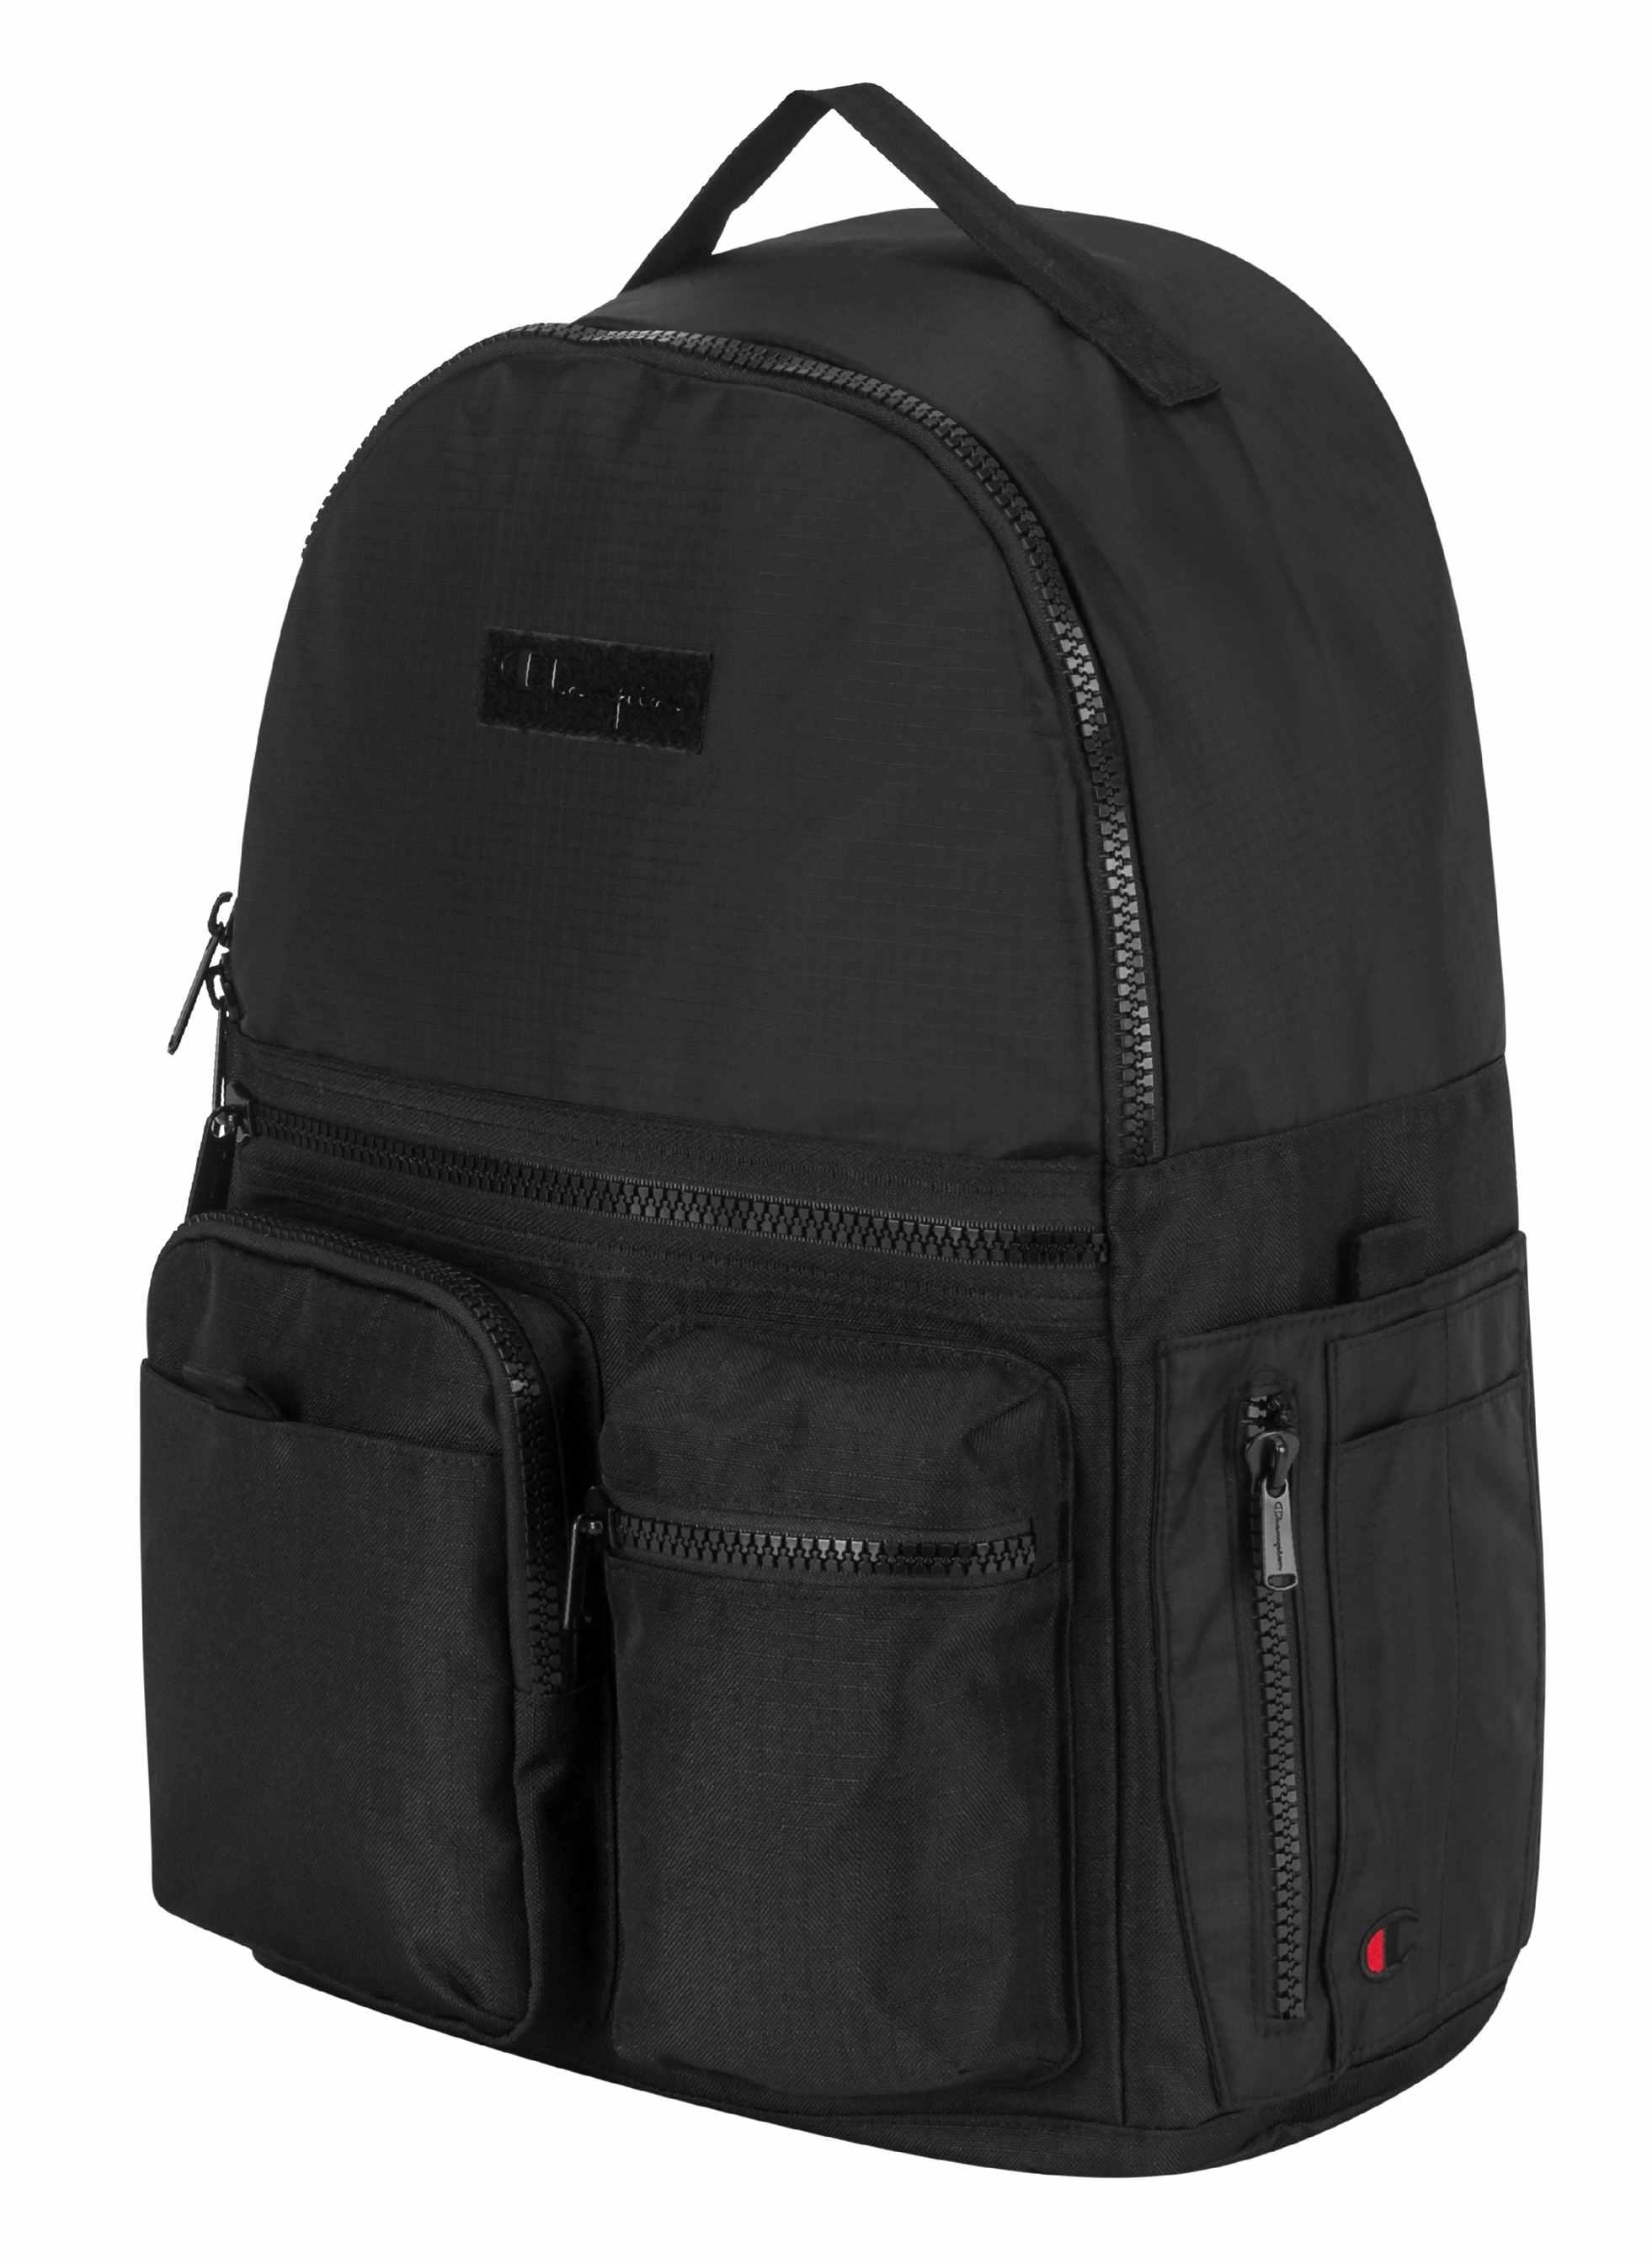  Champion Backpack - Techtility